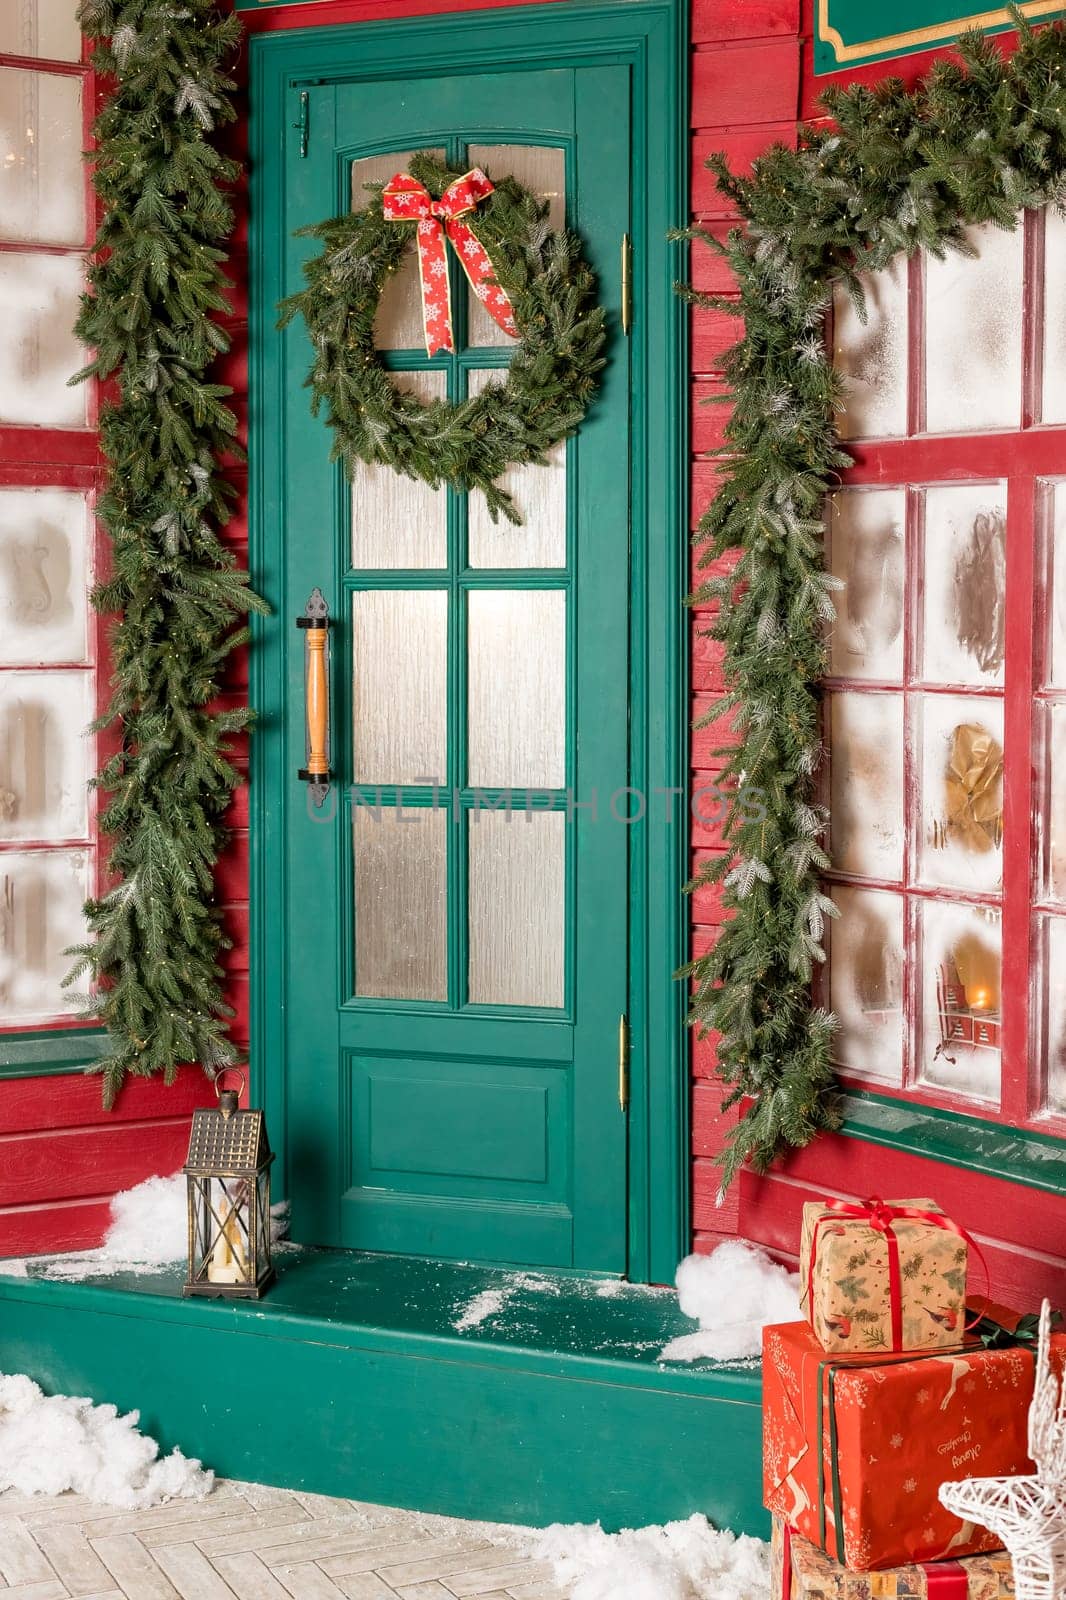 Wreath decoration at door for Christmas holiday.Traditional christmas wreath on old wooden green door in european city street. Stylish christmas street decor, Winter holidays by YuliaYaspe1979